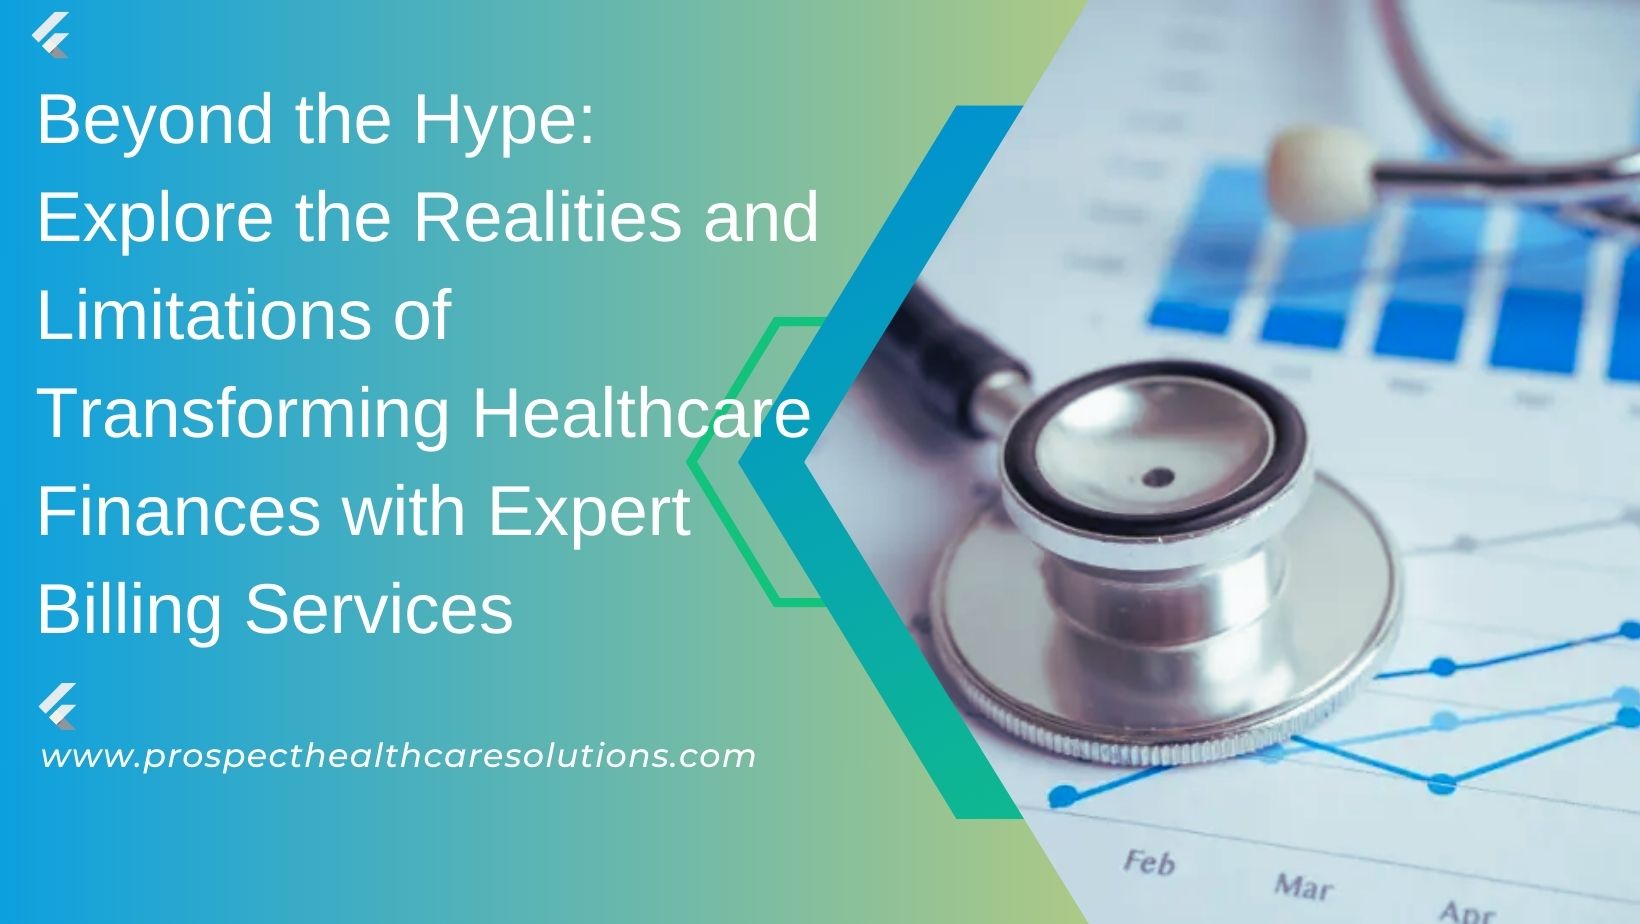 Beyond the Hype: Explore the Realities and Limitations of Transforming Healthcare Finances with Expert Billing Services